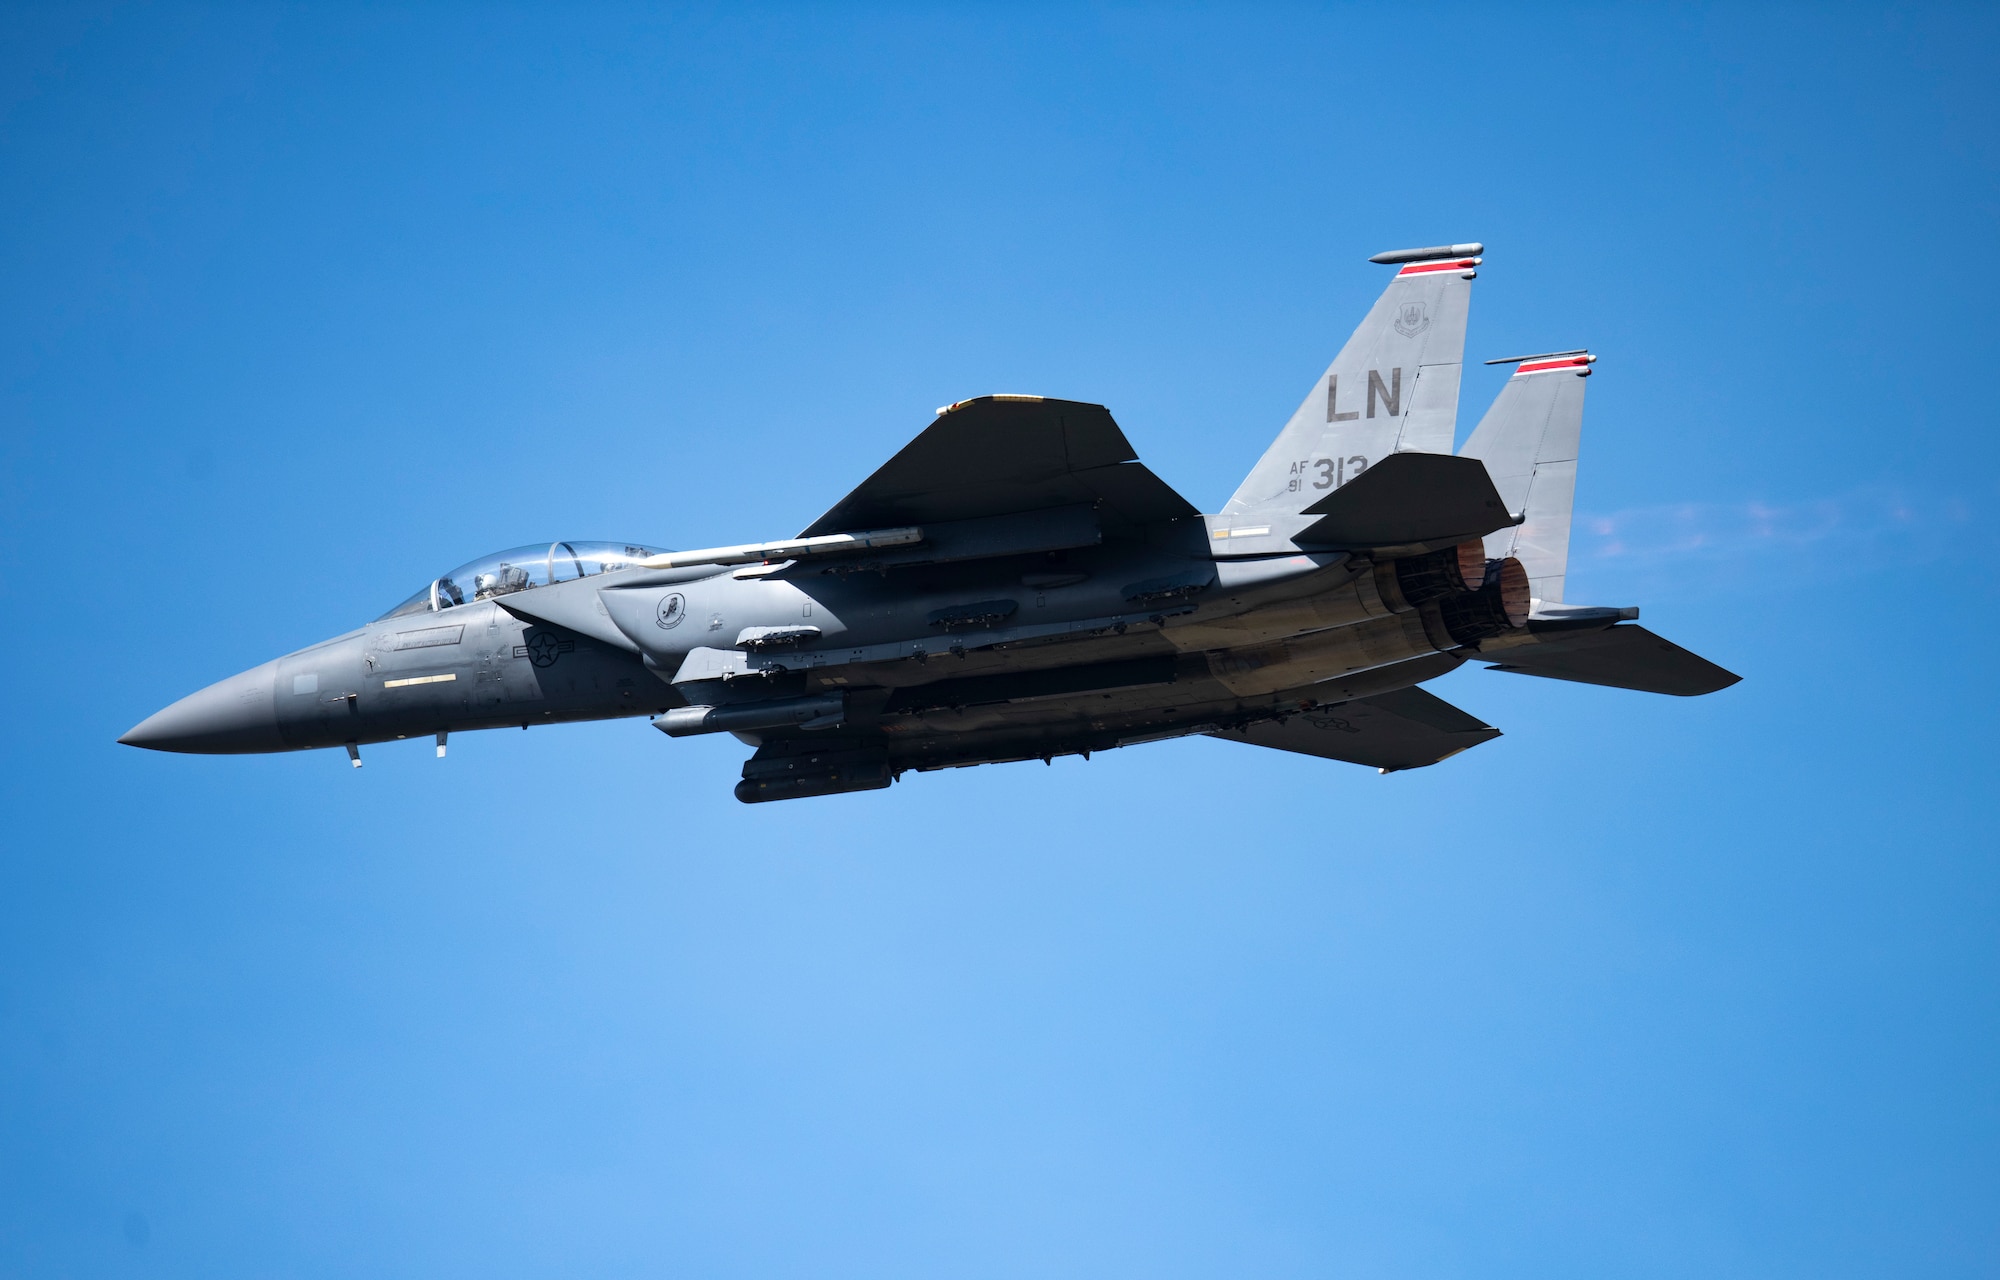 An F-15E Strike Eagle assigned to the 494th Fighter Squadron launches for a training sortie from Royal Air Force Lakenheath, England, April 15, 2020. Despite the current COVID-19 crisis, the 48th Fighter Wing has a critical mission of delivering combat air power when called upon that must continue. (U.S. Air Force photo by Airman 1st Class Madeline Herzog)